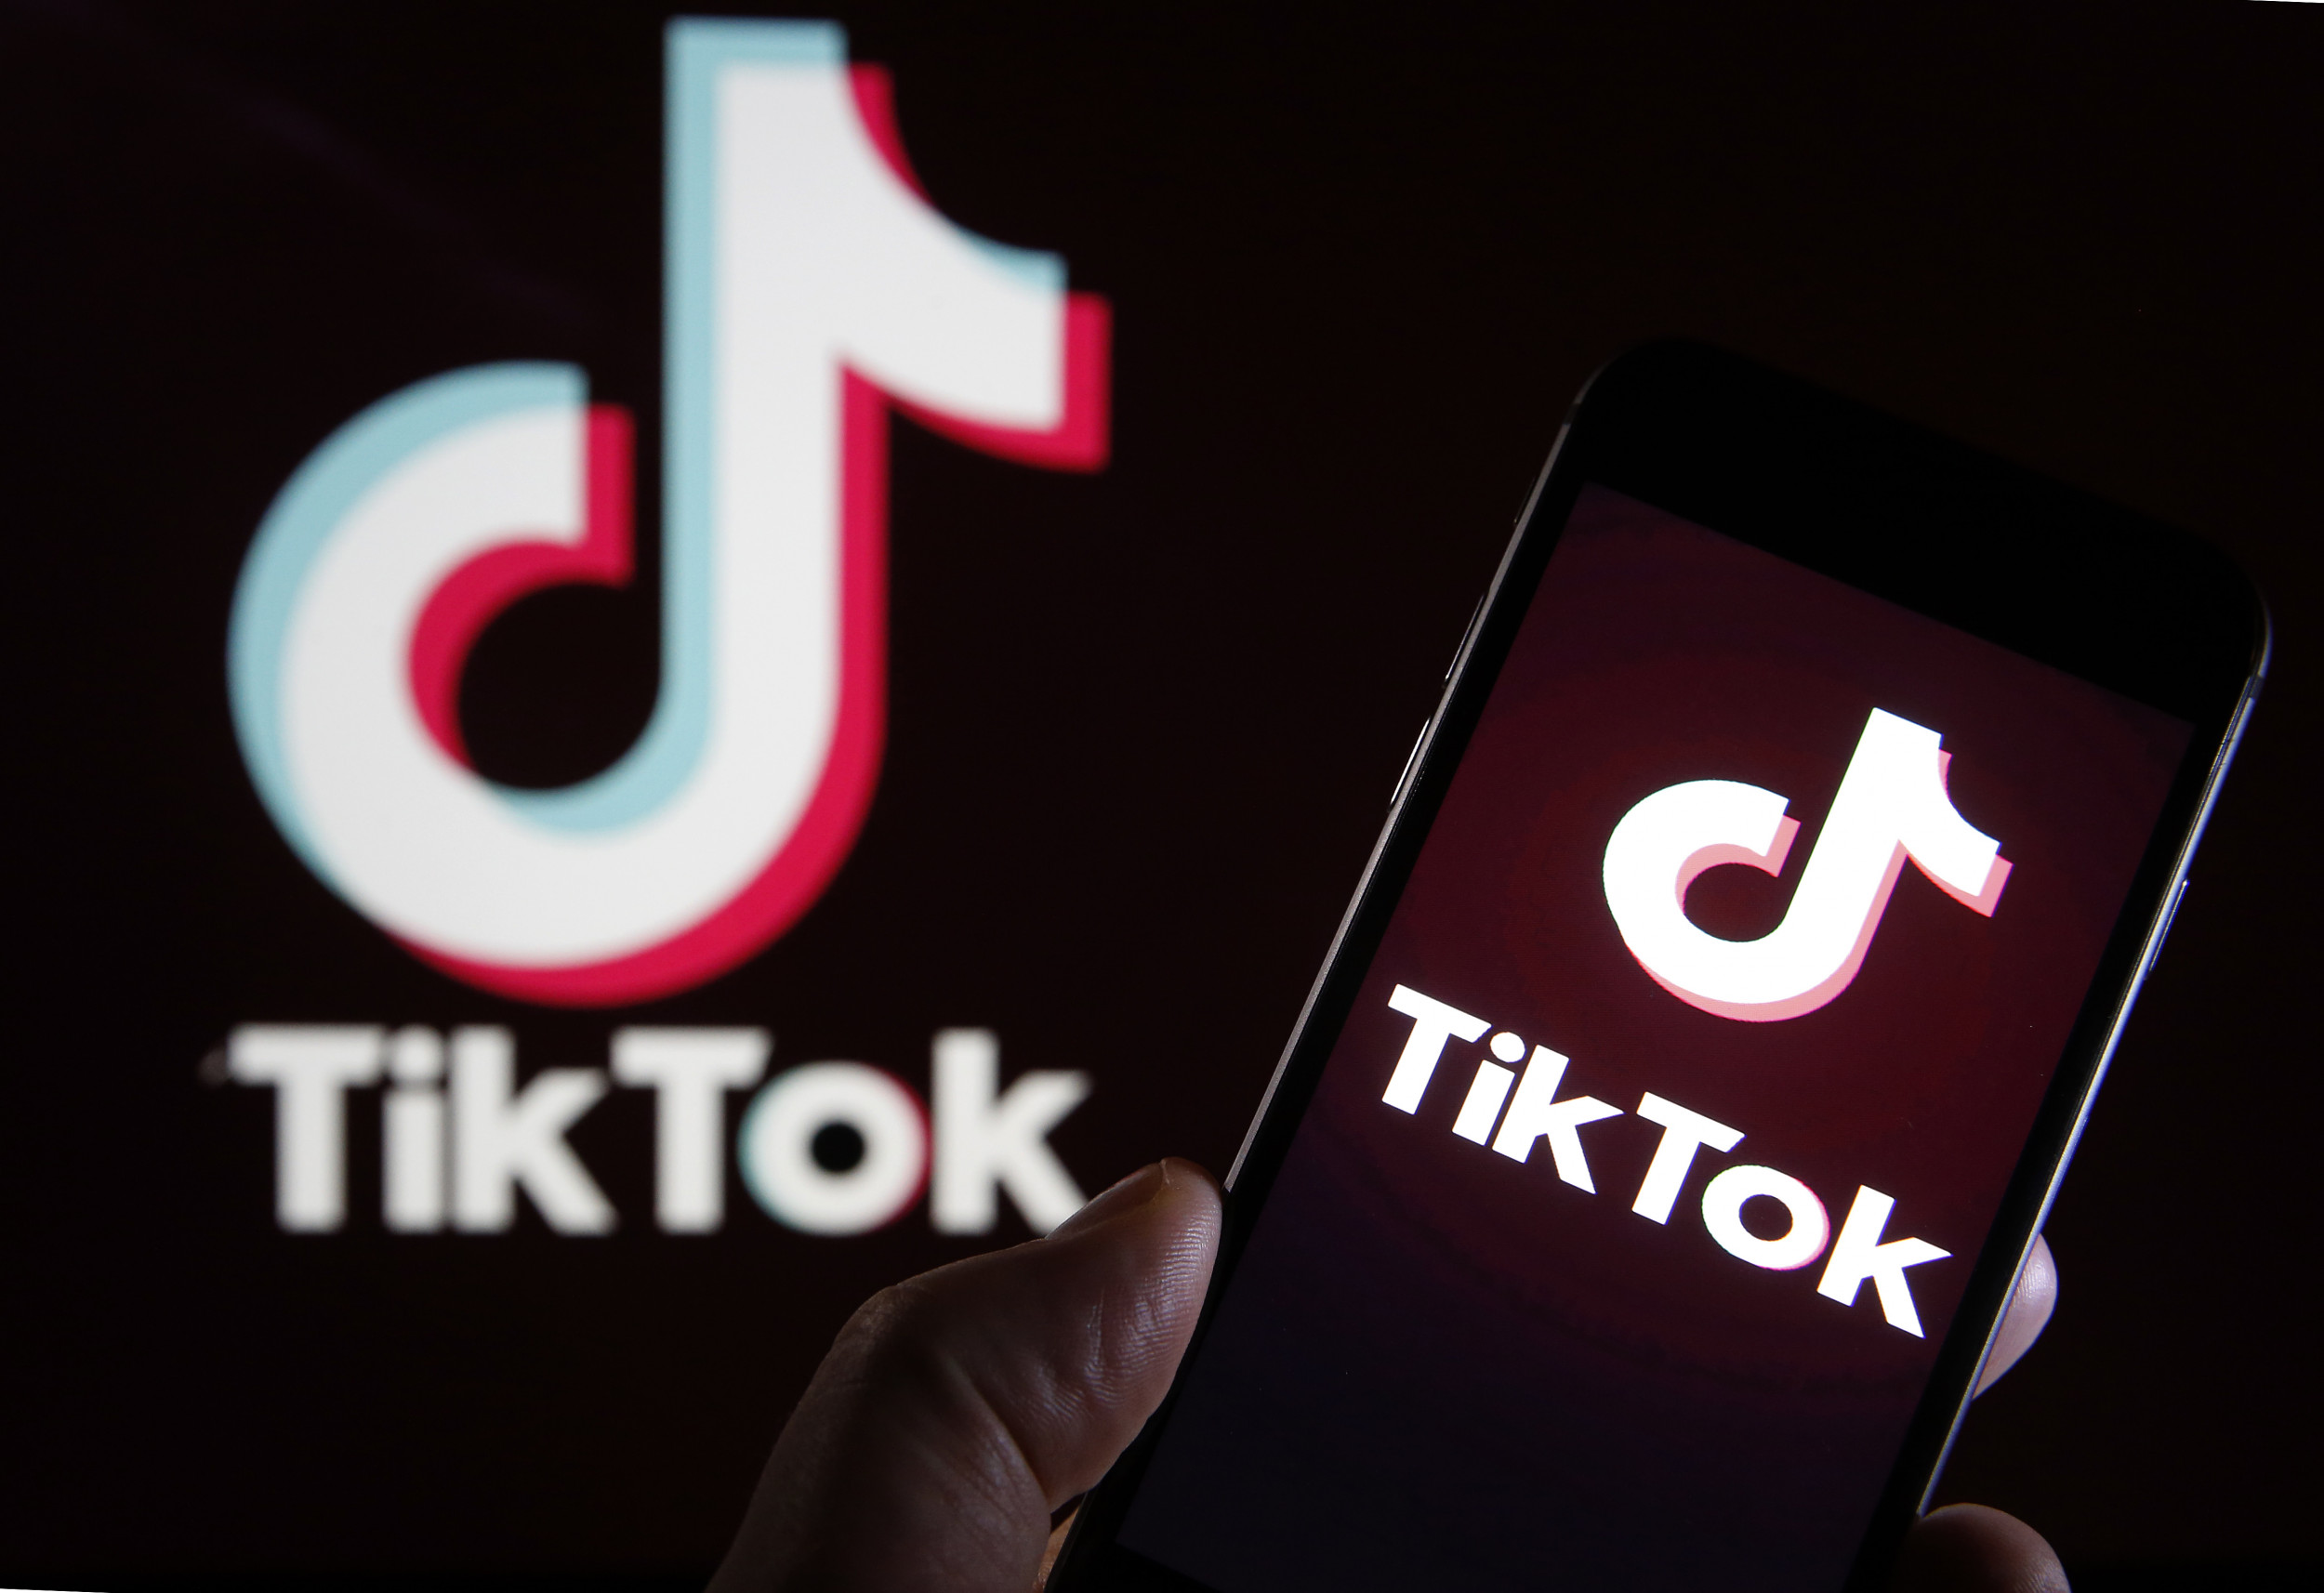 No TikTok Star Is Quite as Loved as This 81YearOld 'Grandpa' Named